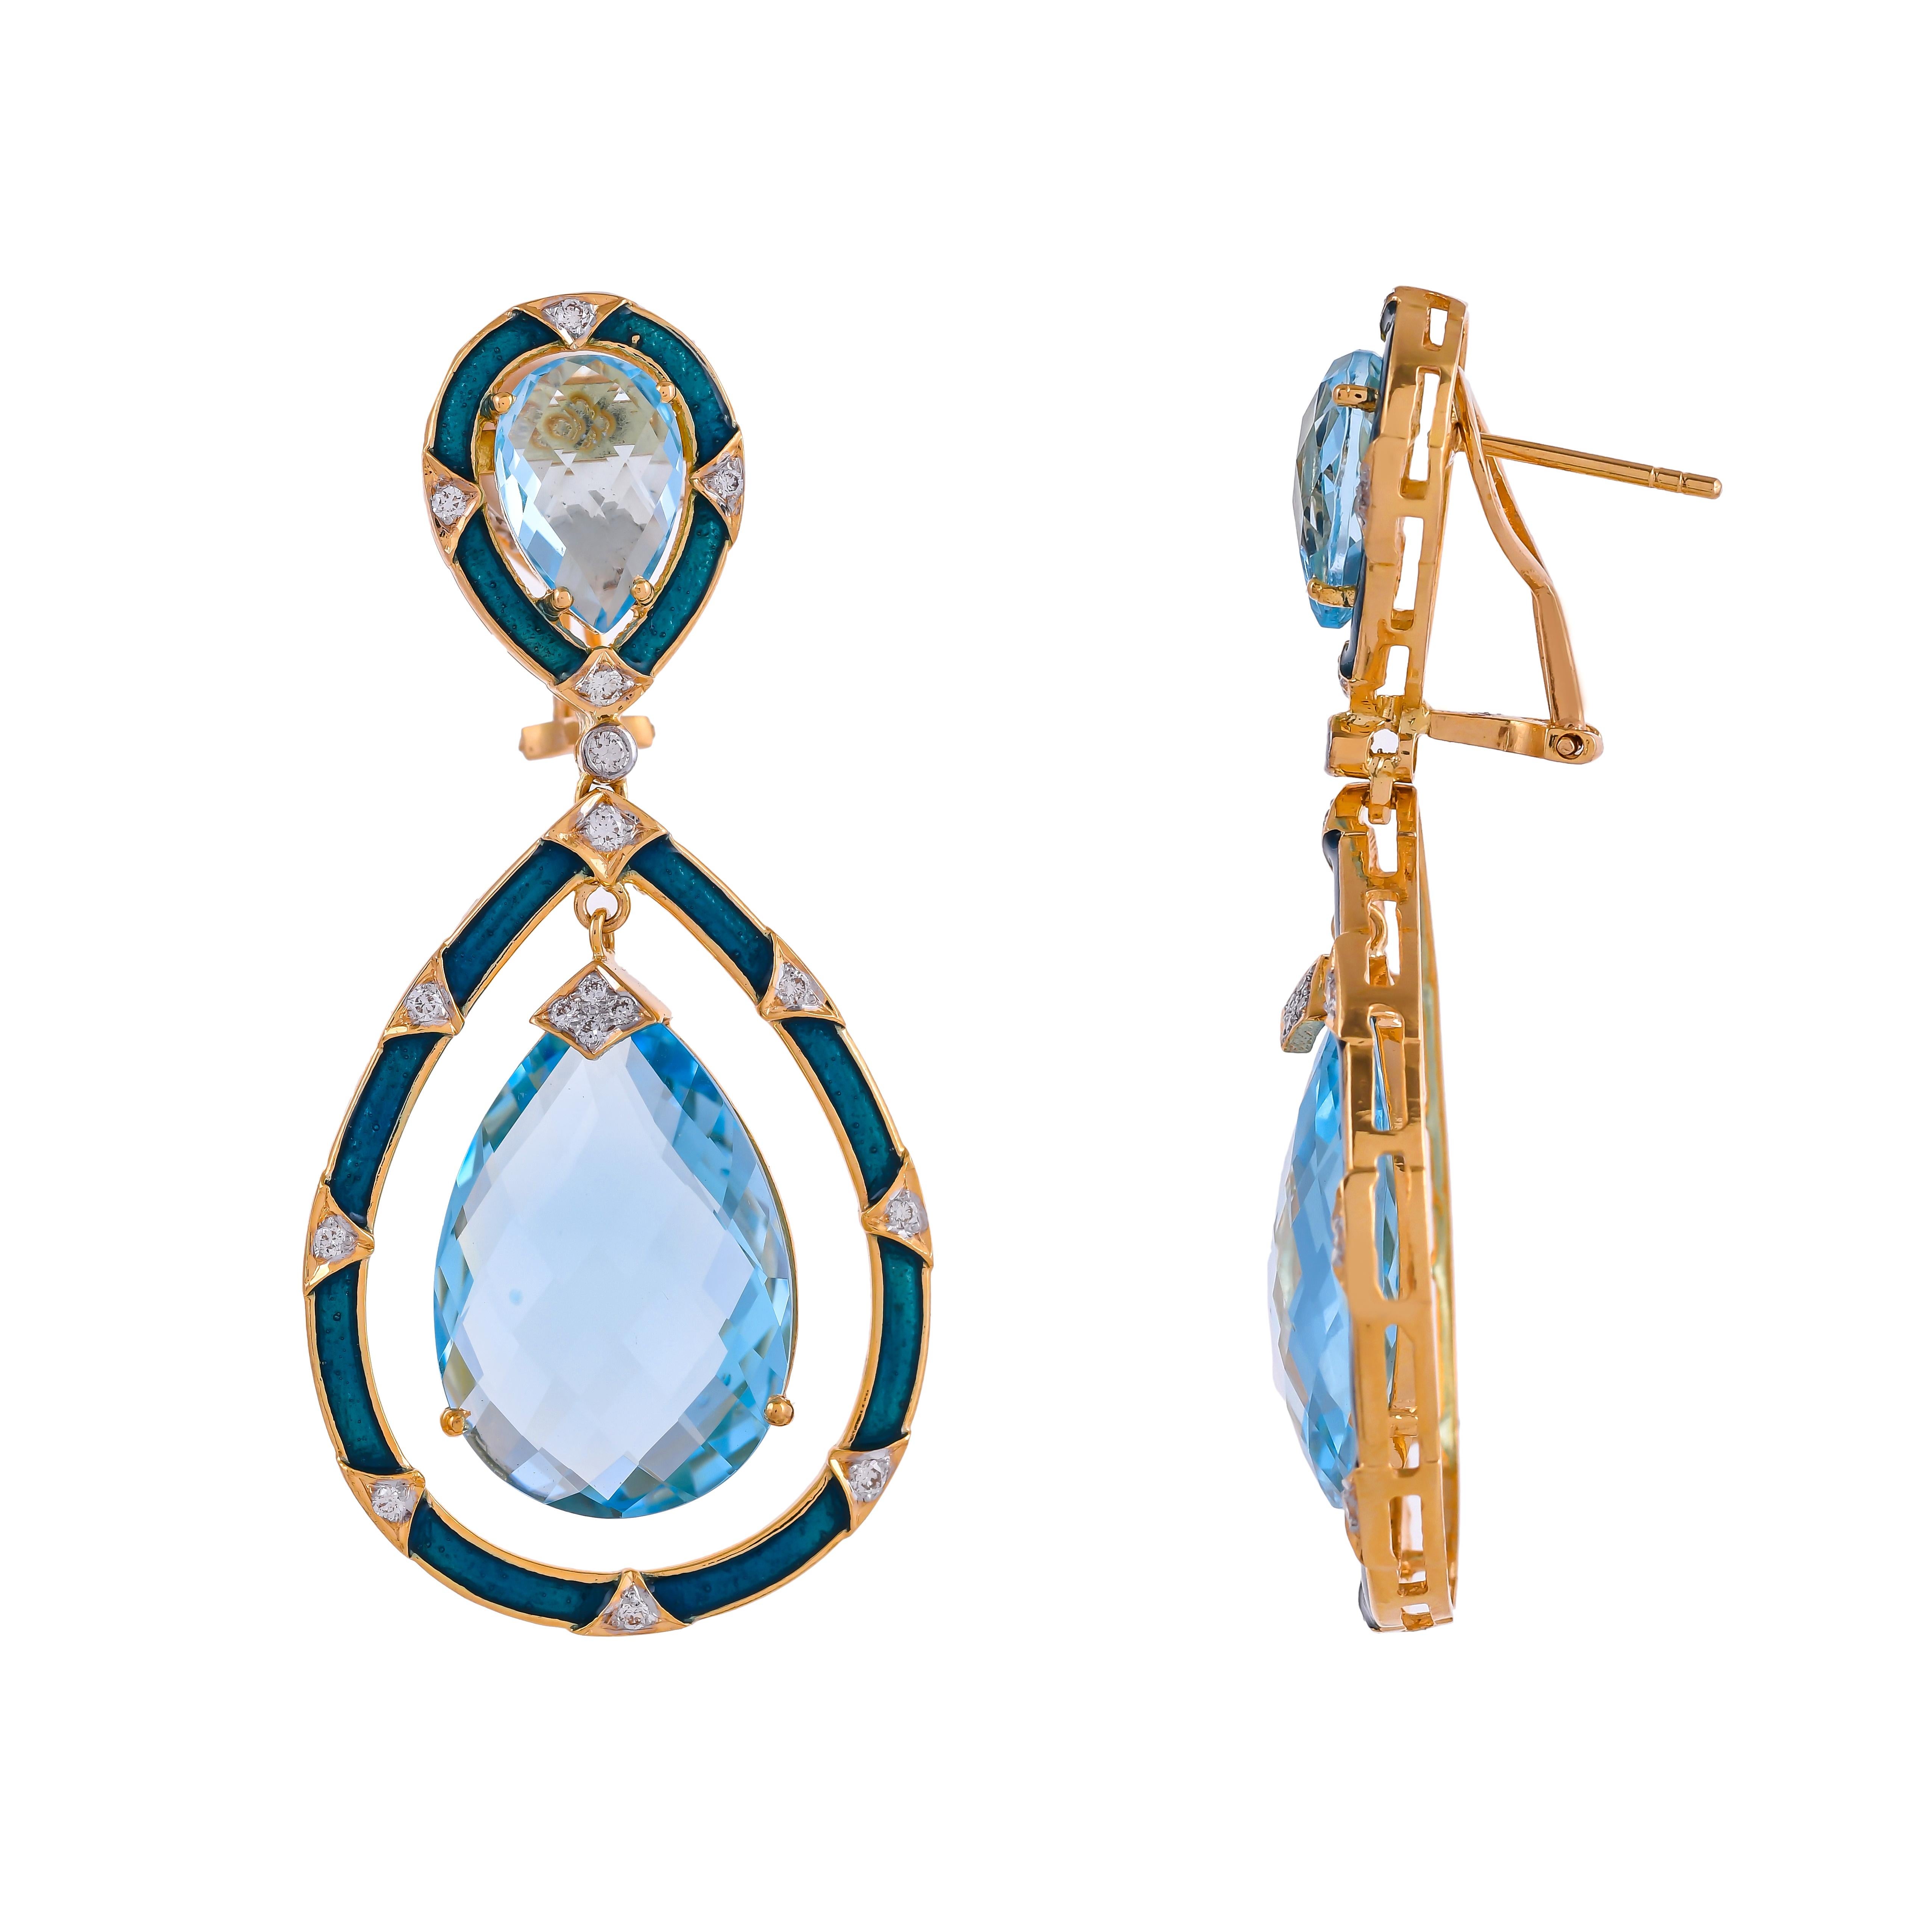 Mounted in 18 karats yellow gold, this contemporary and stylish earring is from the collection 'color story'. This elegant earring features 35.99 carats sky blue topaz teardrop enhanced with matching jewel tone of enamel and 0.51 carats diamonds to